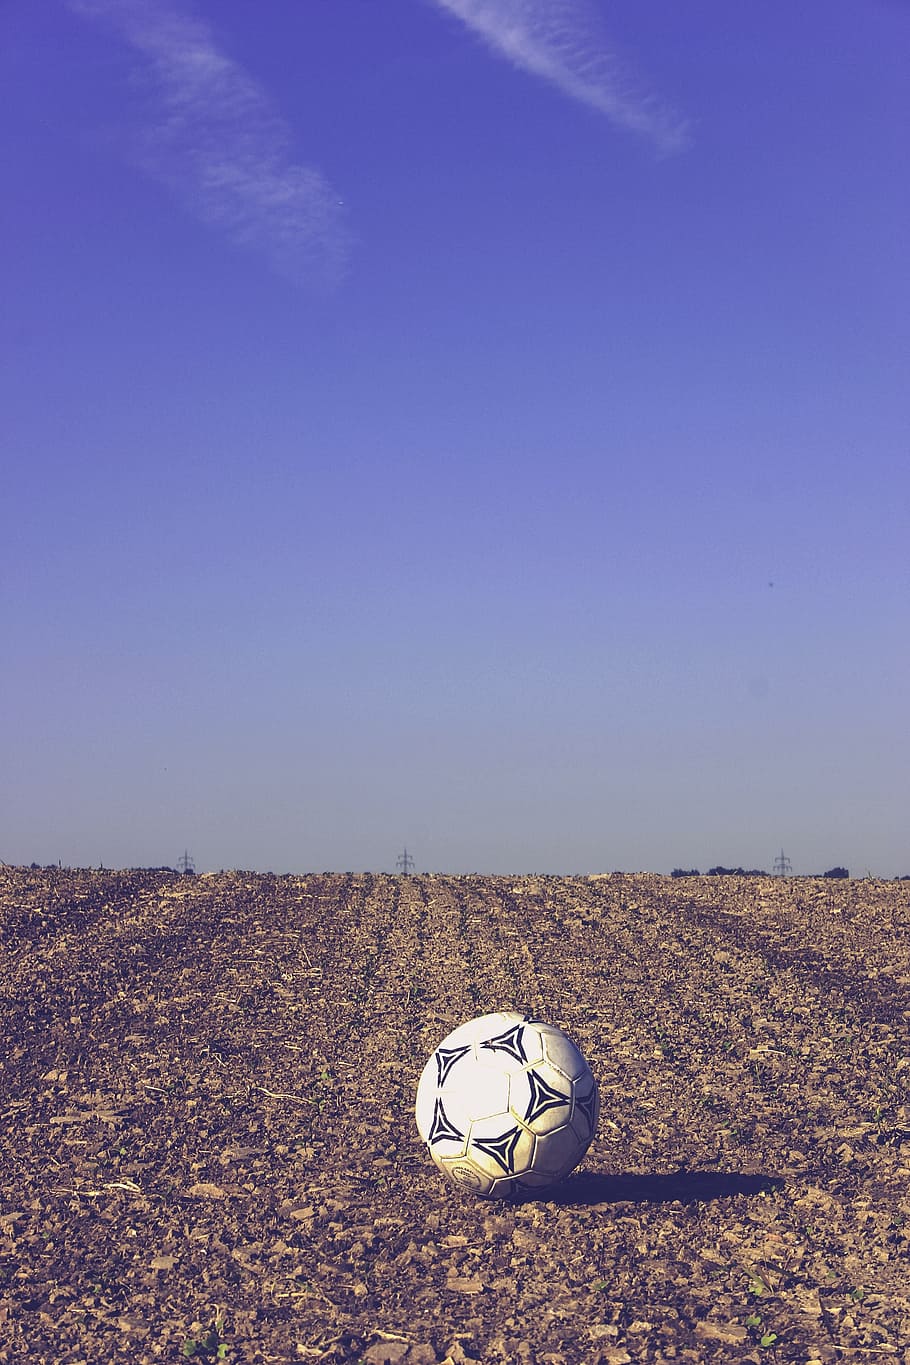 Page 24 - soccer ball 1080P, 2K, 4K, 5K HD wallpapers free download - Wallpaper Flare